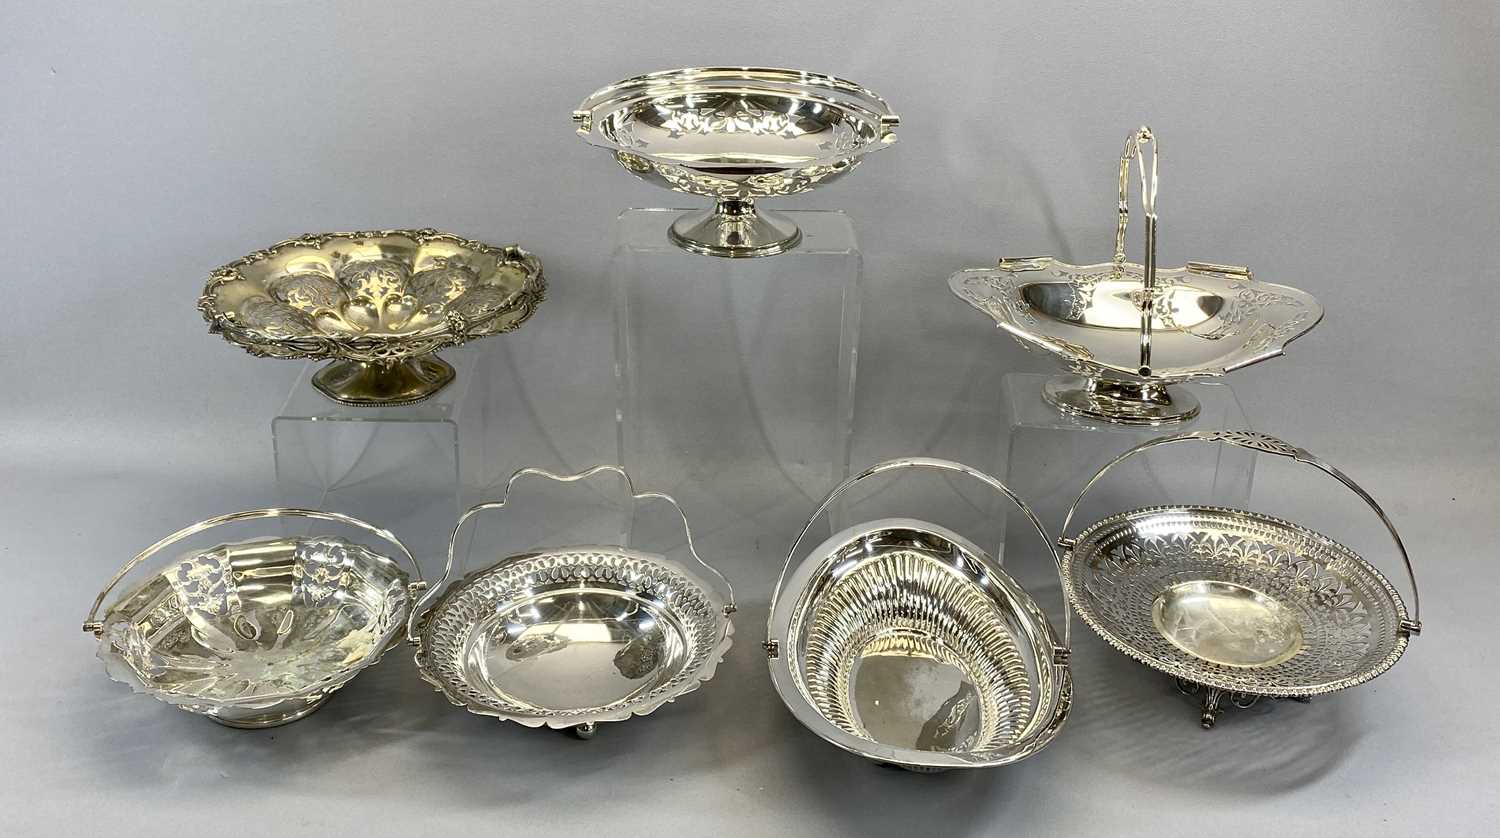 SEVEN VARIOUS SILVER PLATED SWING-HANDLED FRUIT / BREAD BASKETS, various designs, most having